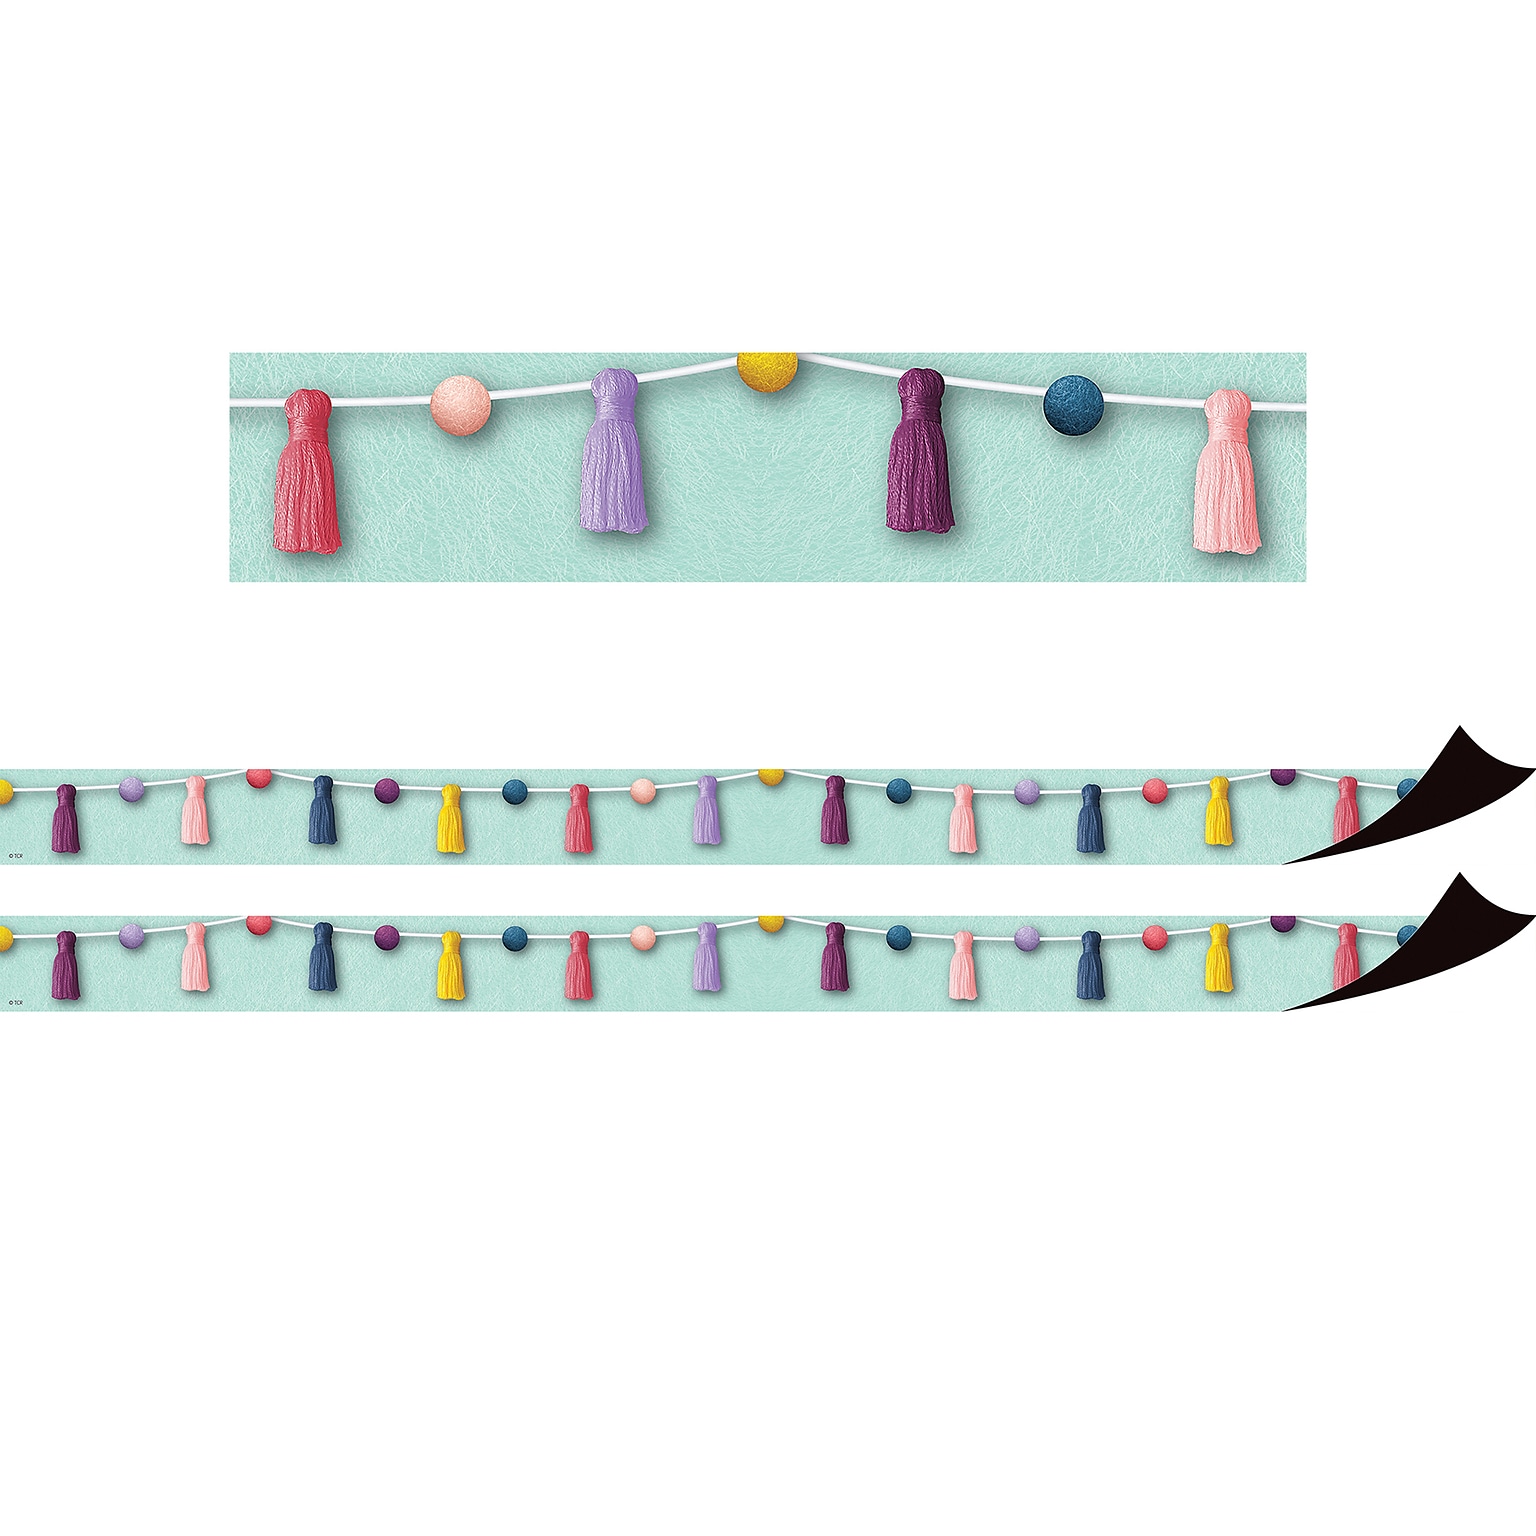 Teacher Created Resources Oh Happy Day Magnetic Borders/Trim, 1.5 x 24, Pom-Poms and Tassels, 2/Pack (TCR77568-2)